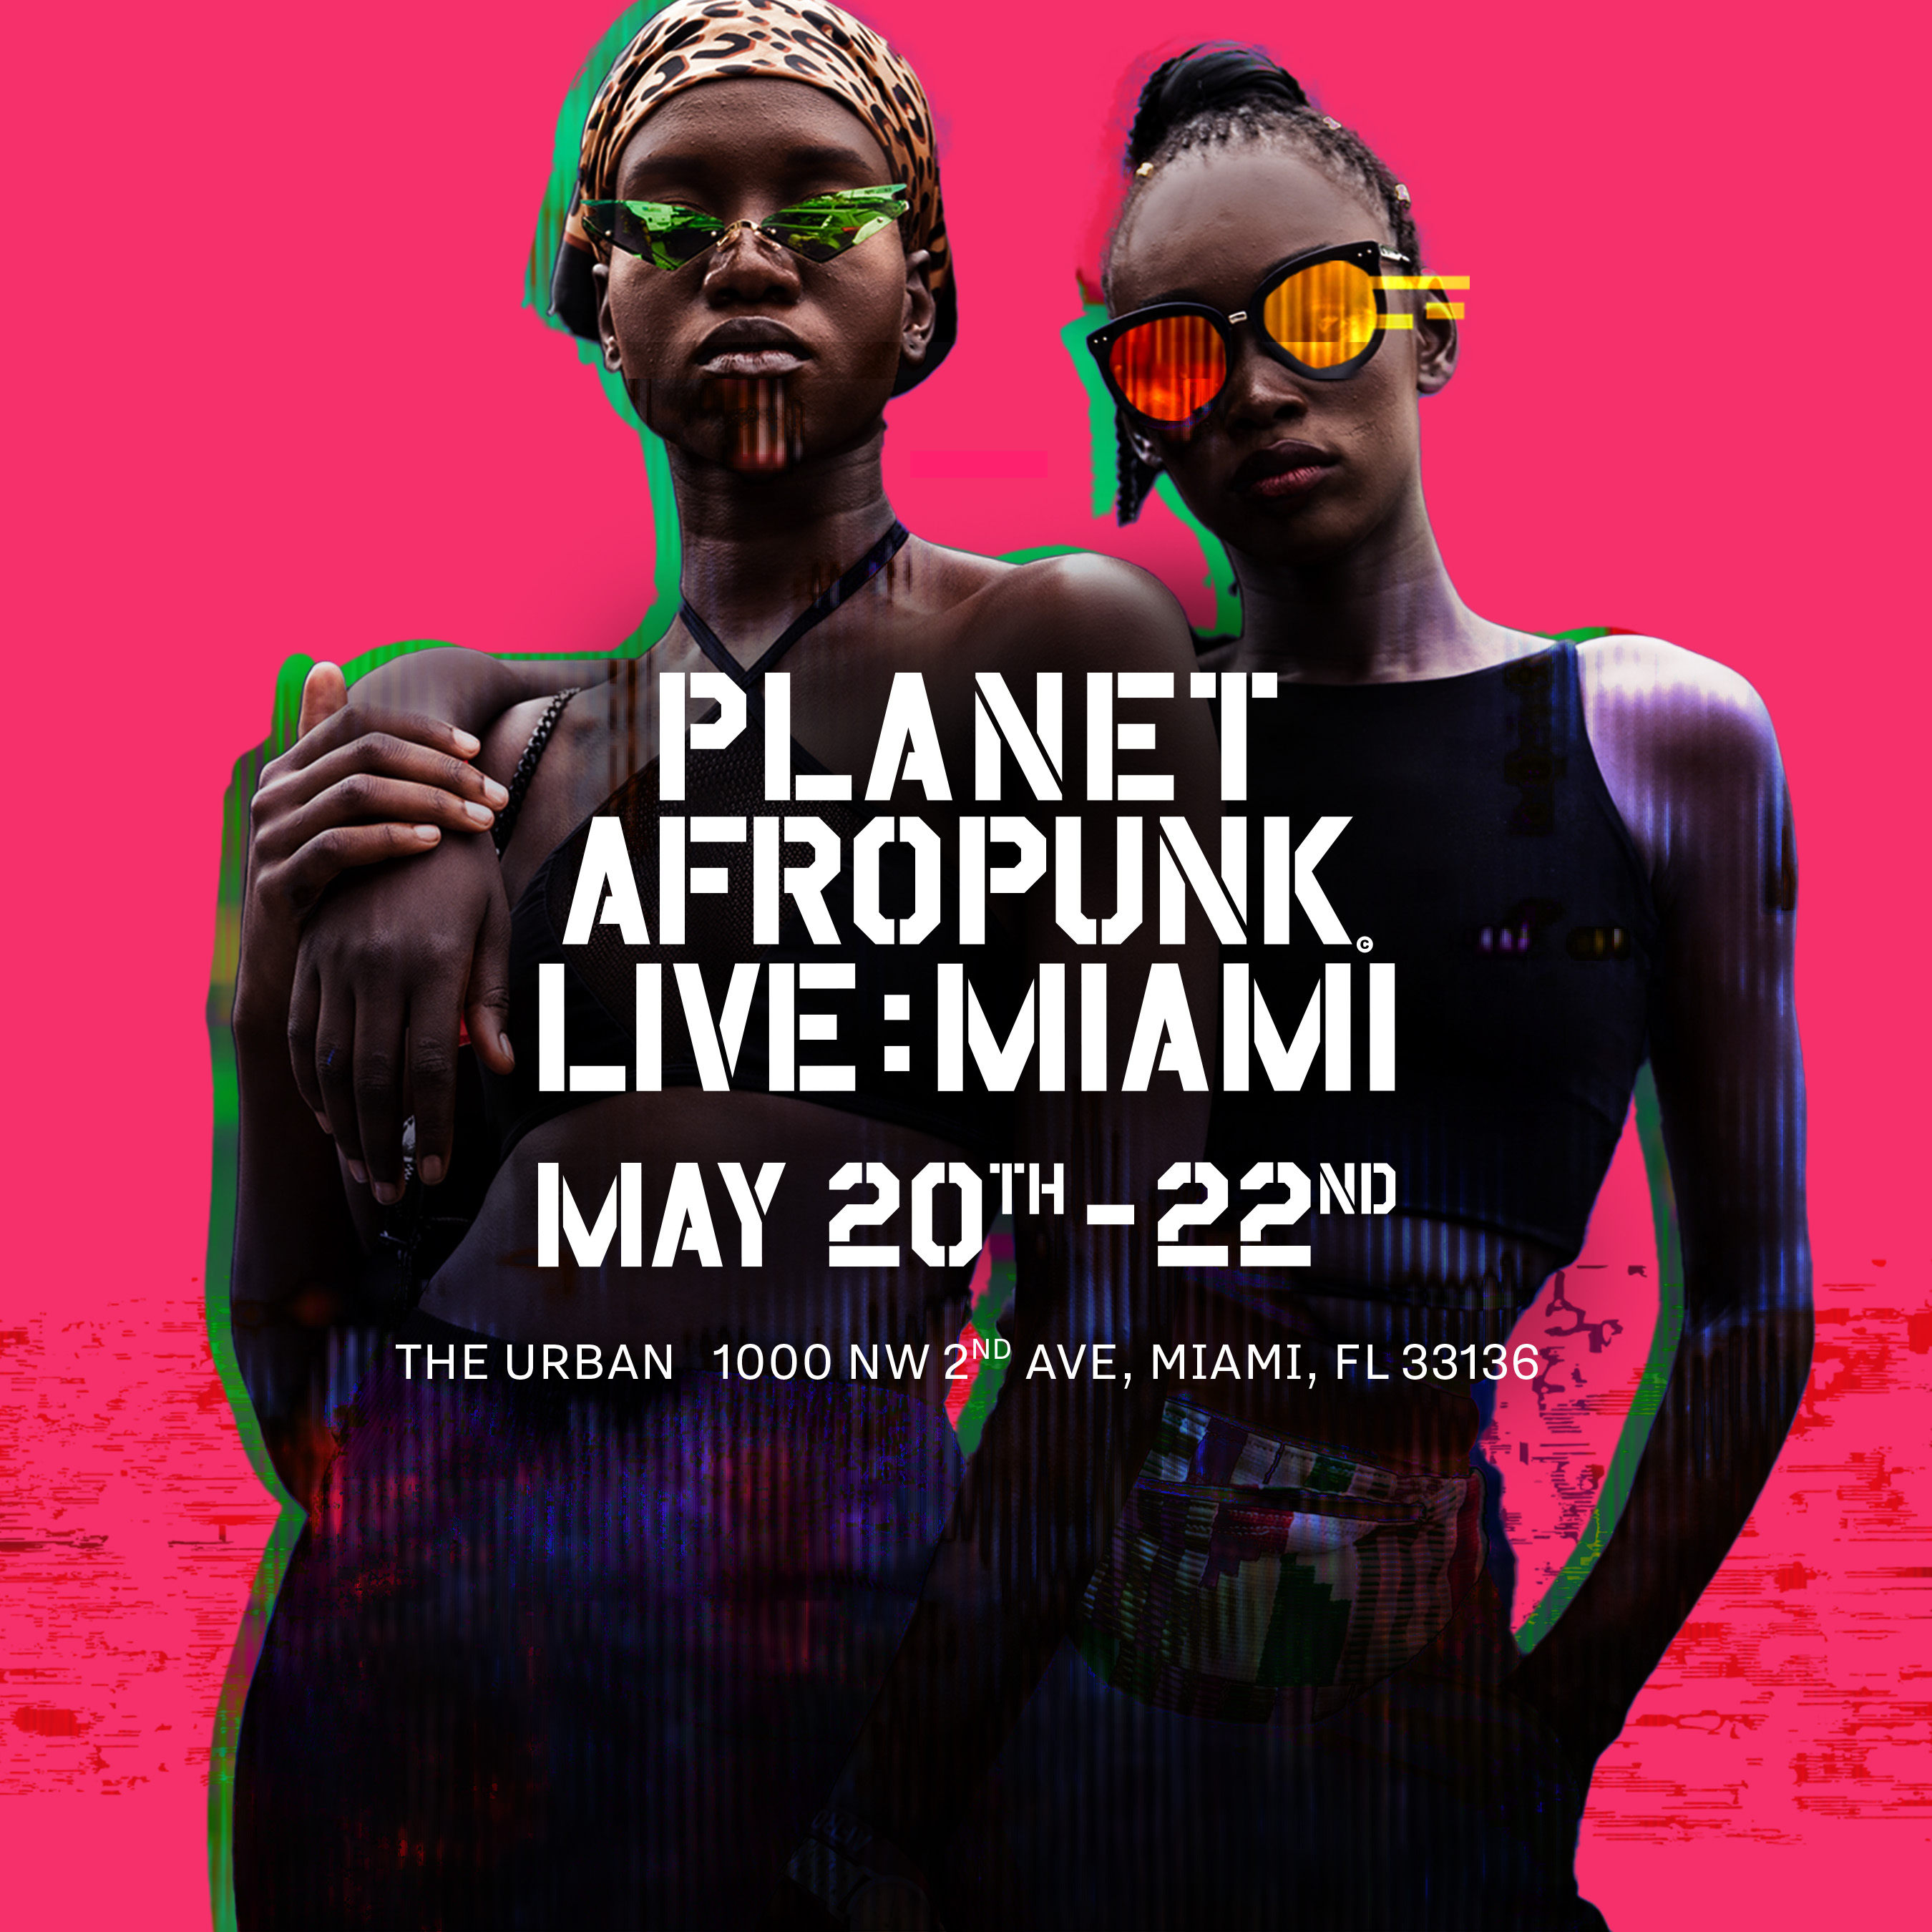 Buy Tickets to AFROPUNK Live Miami in Miami on May 20, 2022